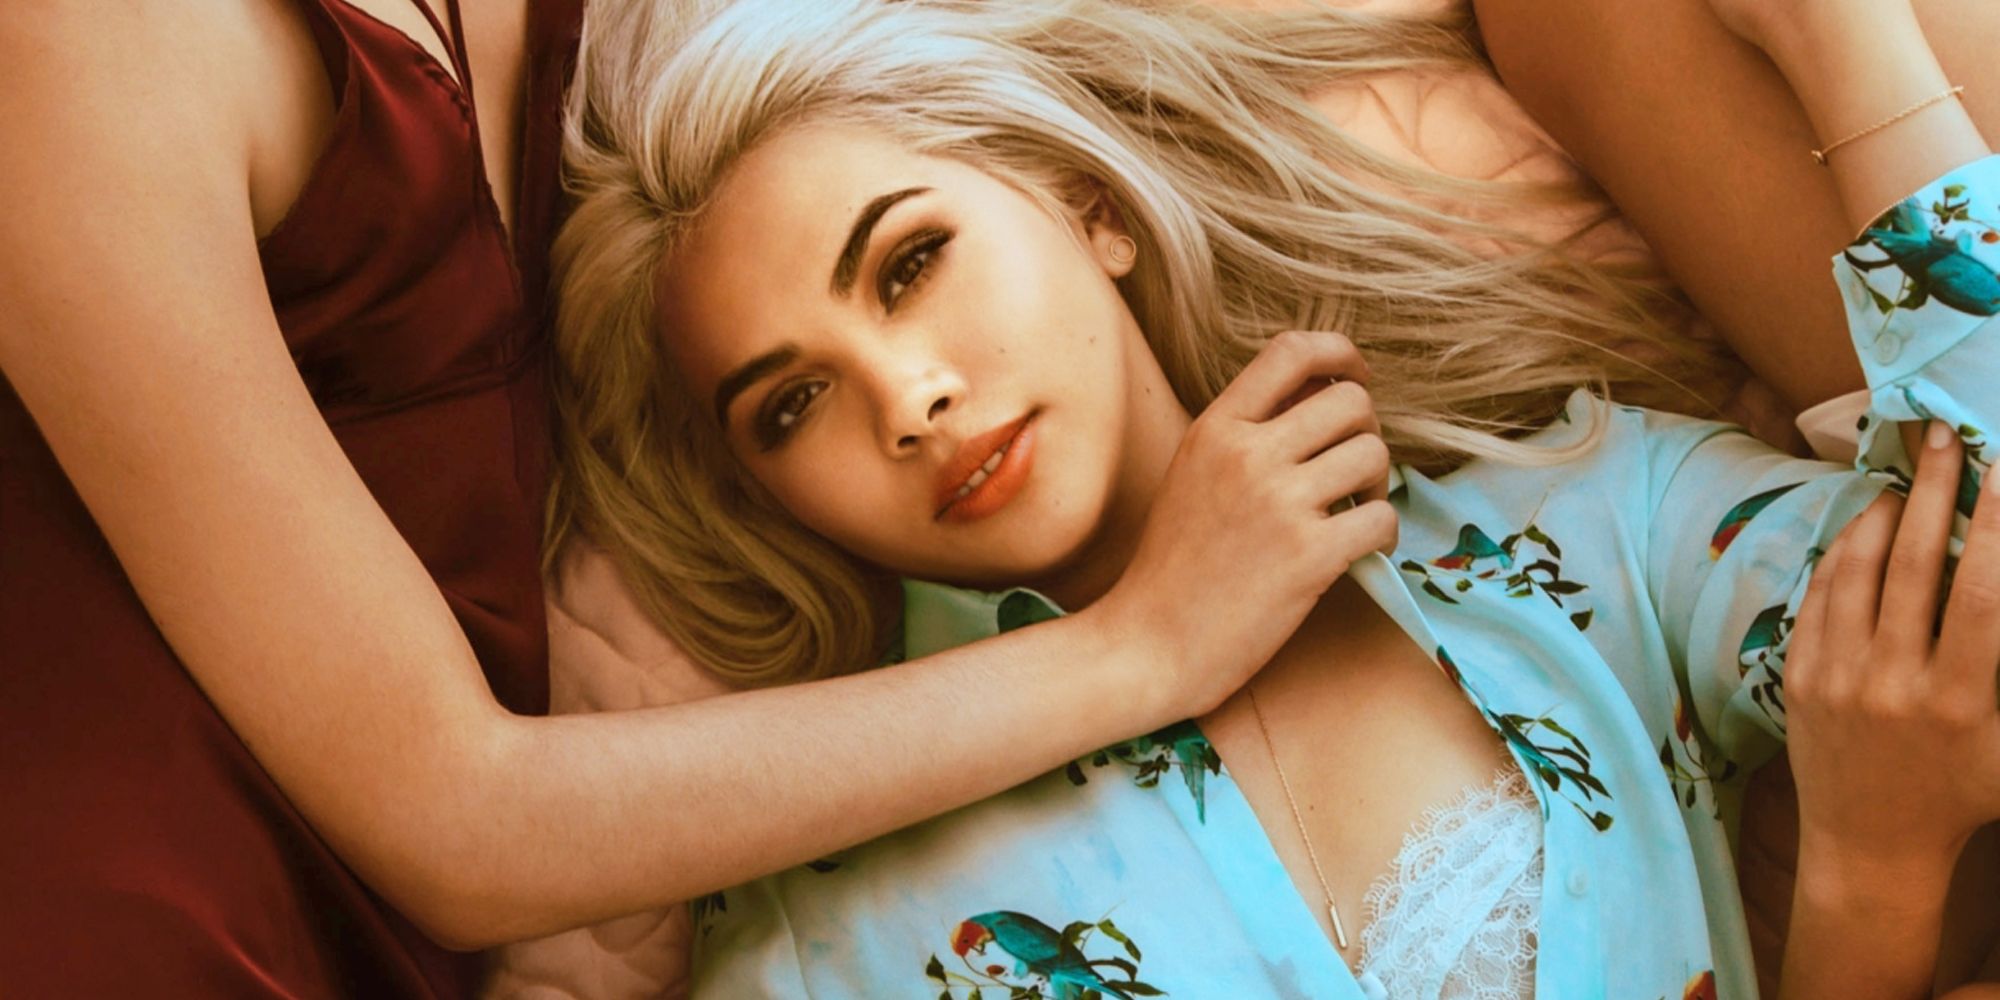 Summer Rae Naked Porn - Hayley Kiyoko Exclusive Interview About Insecure Guest Role - Hayley Kiyoko  About Being a Woman of Color, Artist, and Director